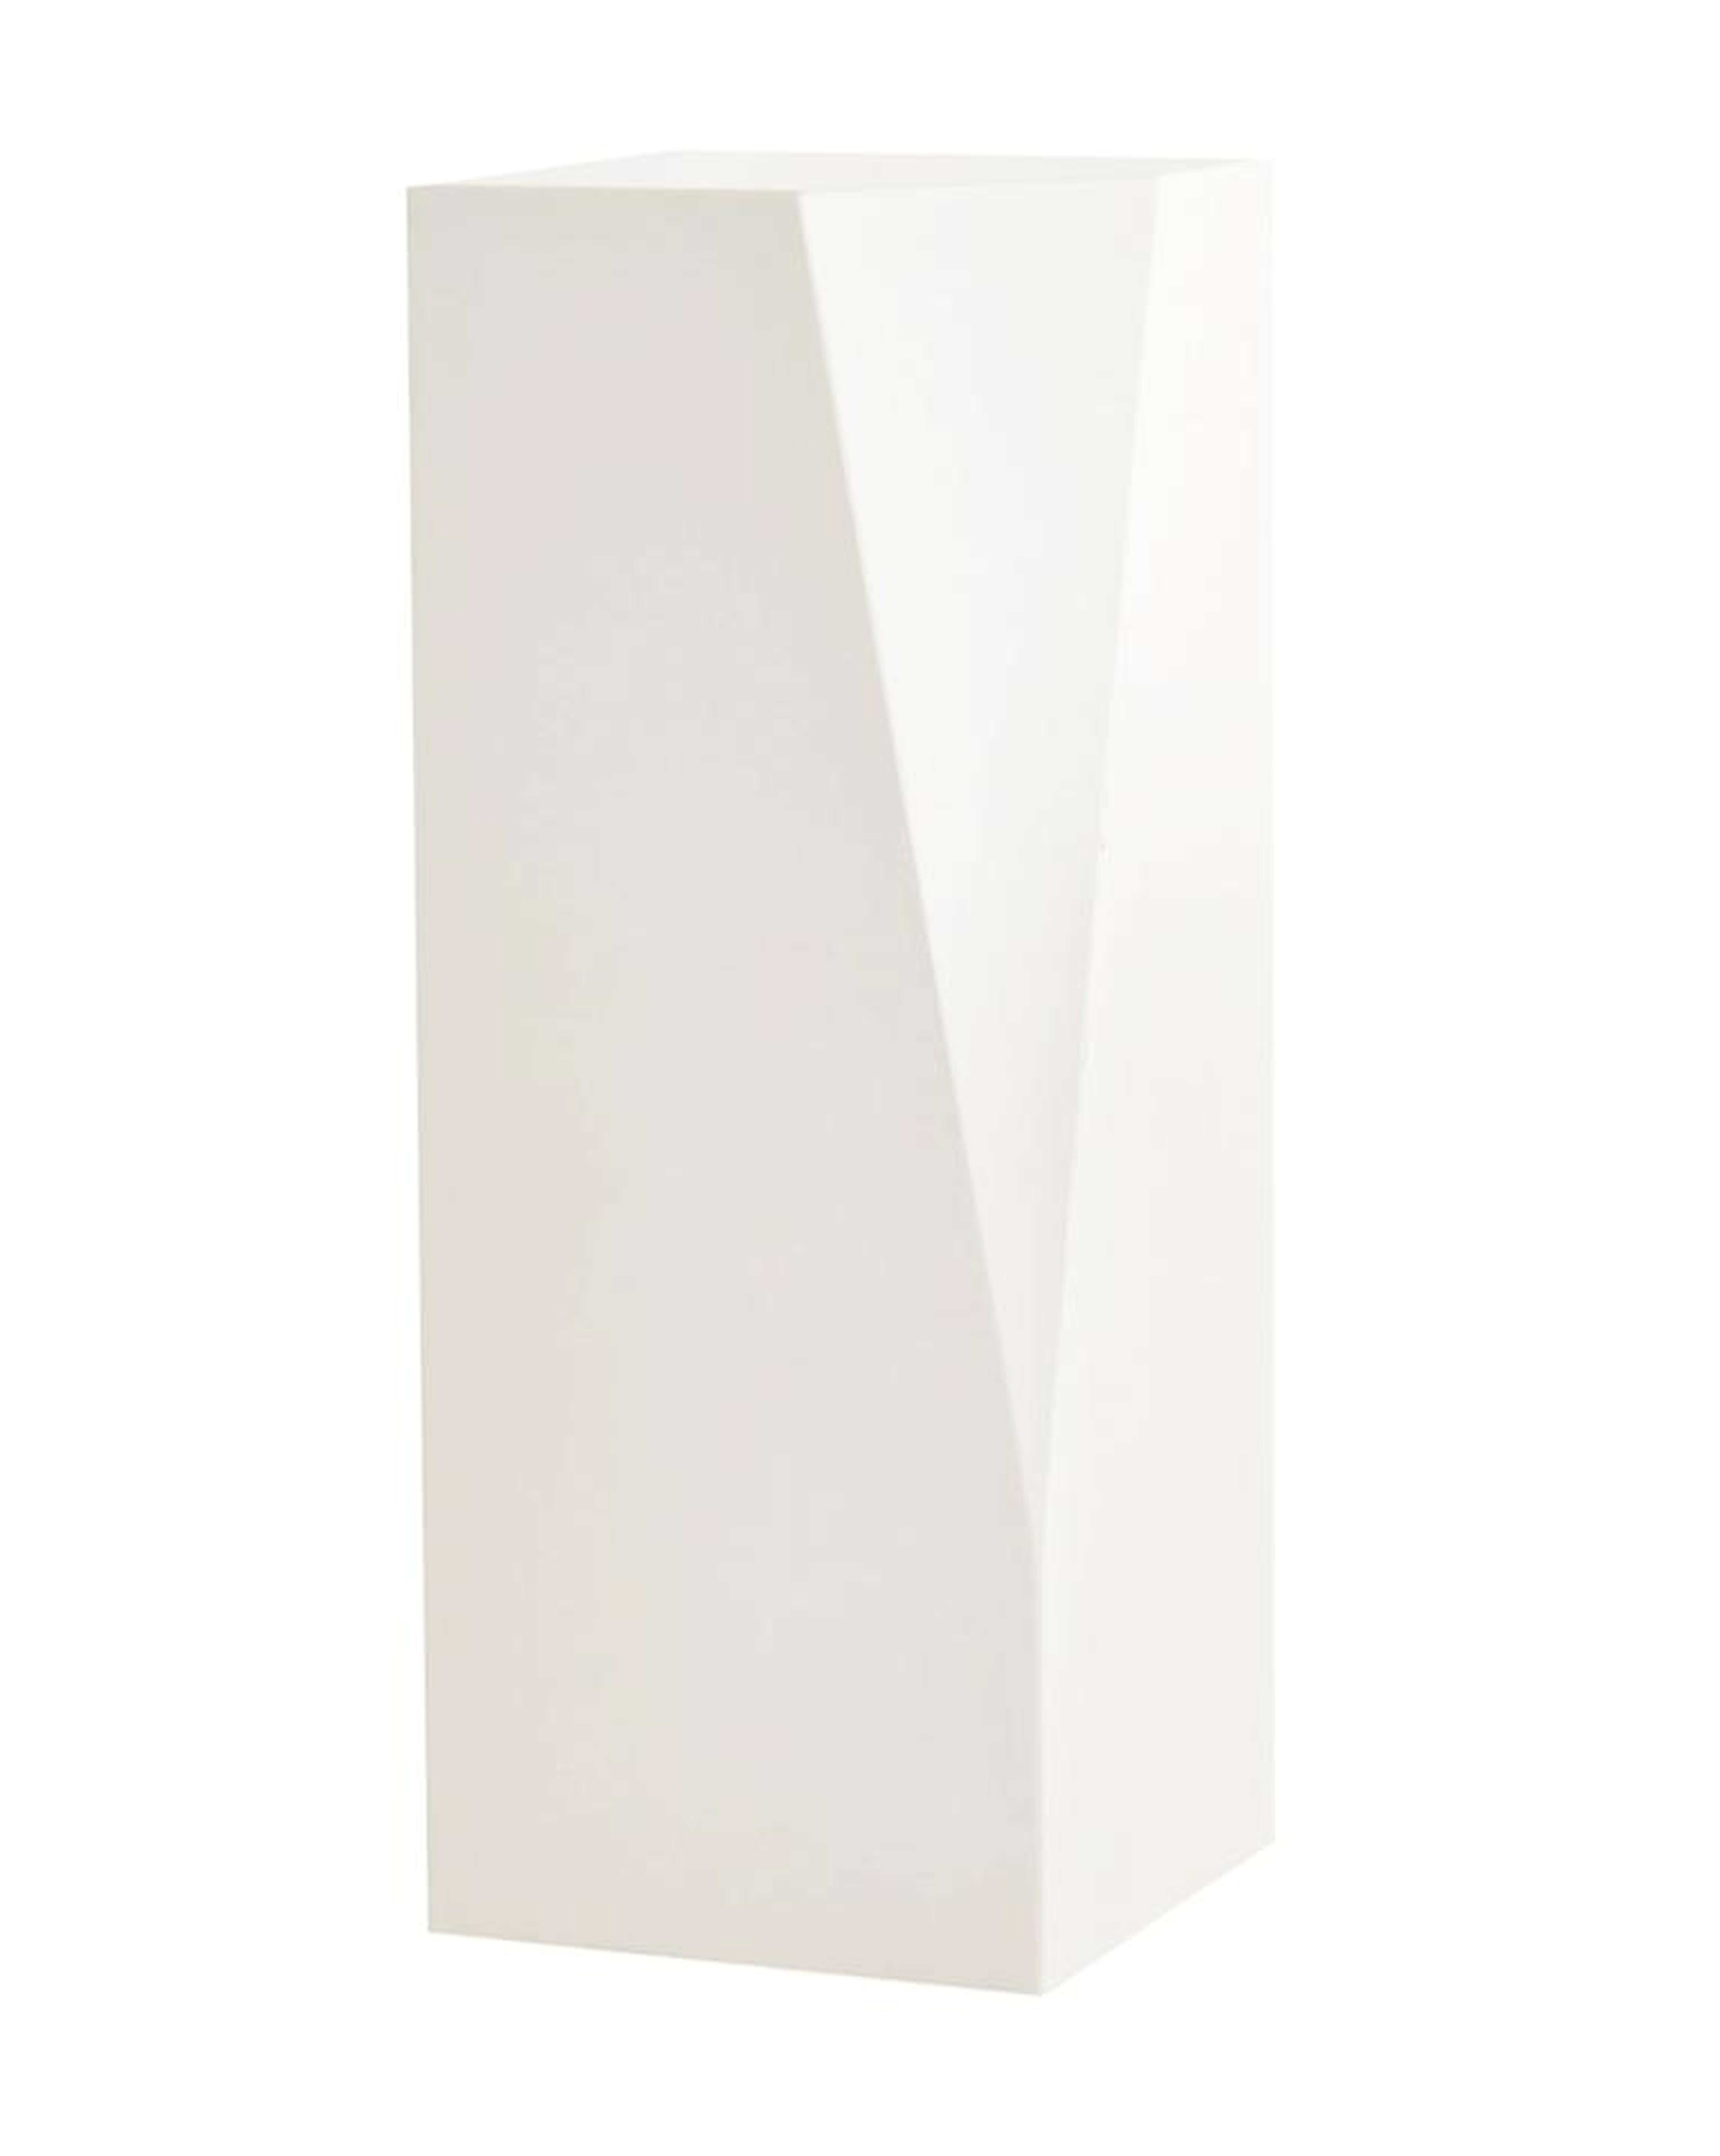 Albin Faceted Pedestal - Large - McGee & Co.